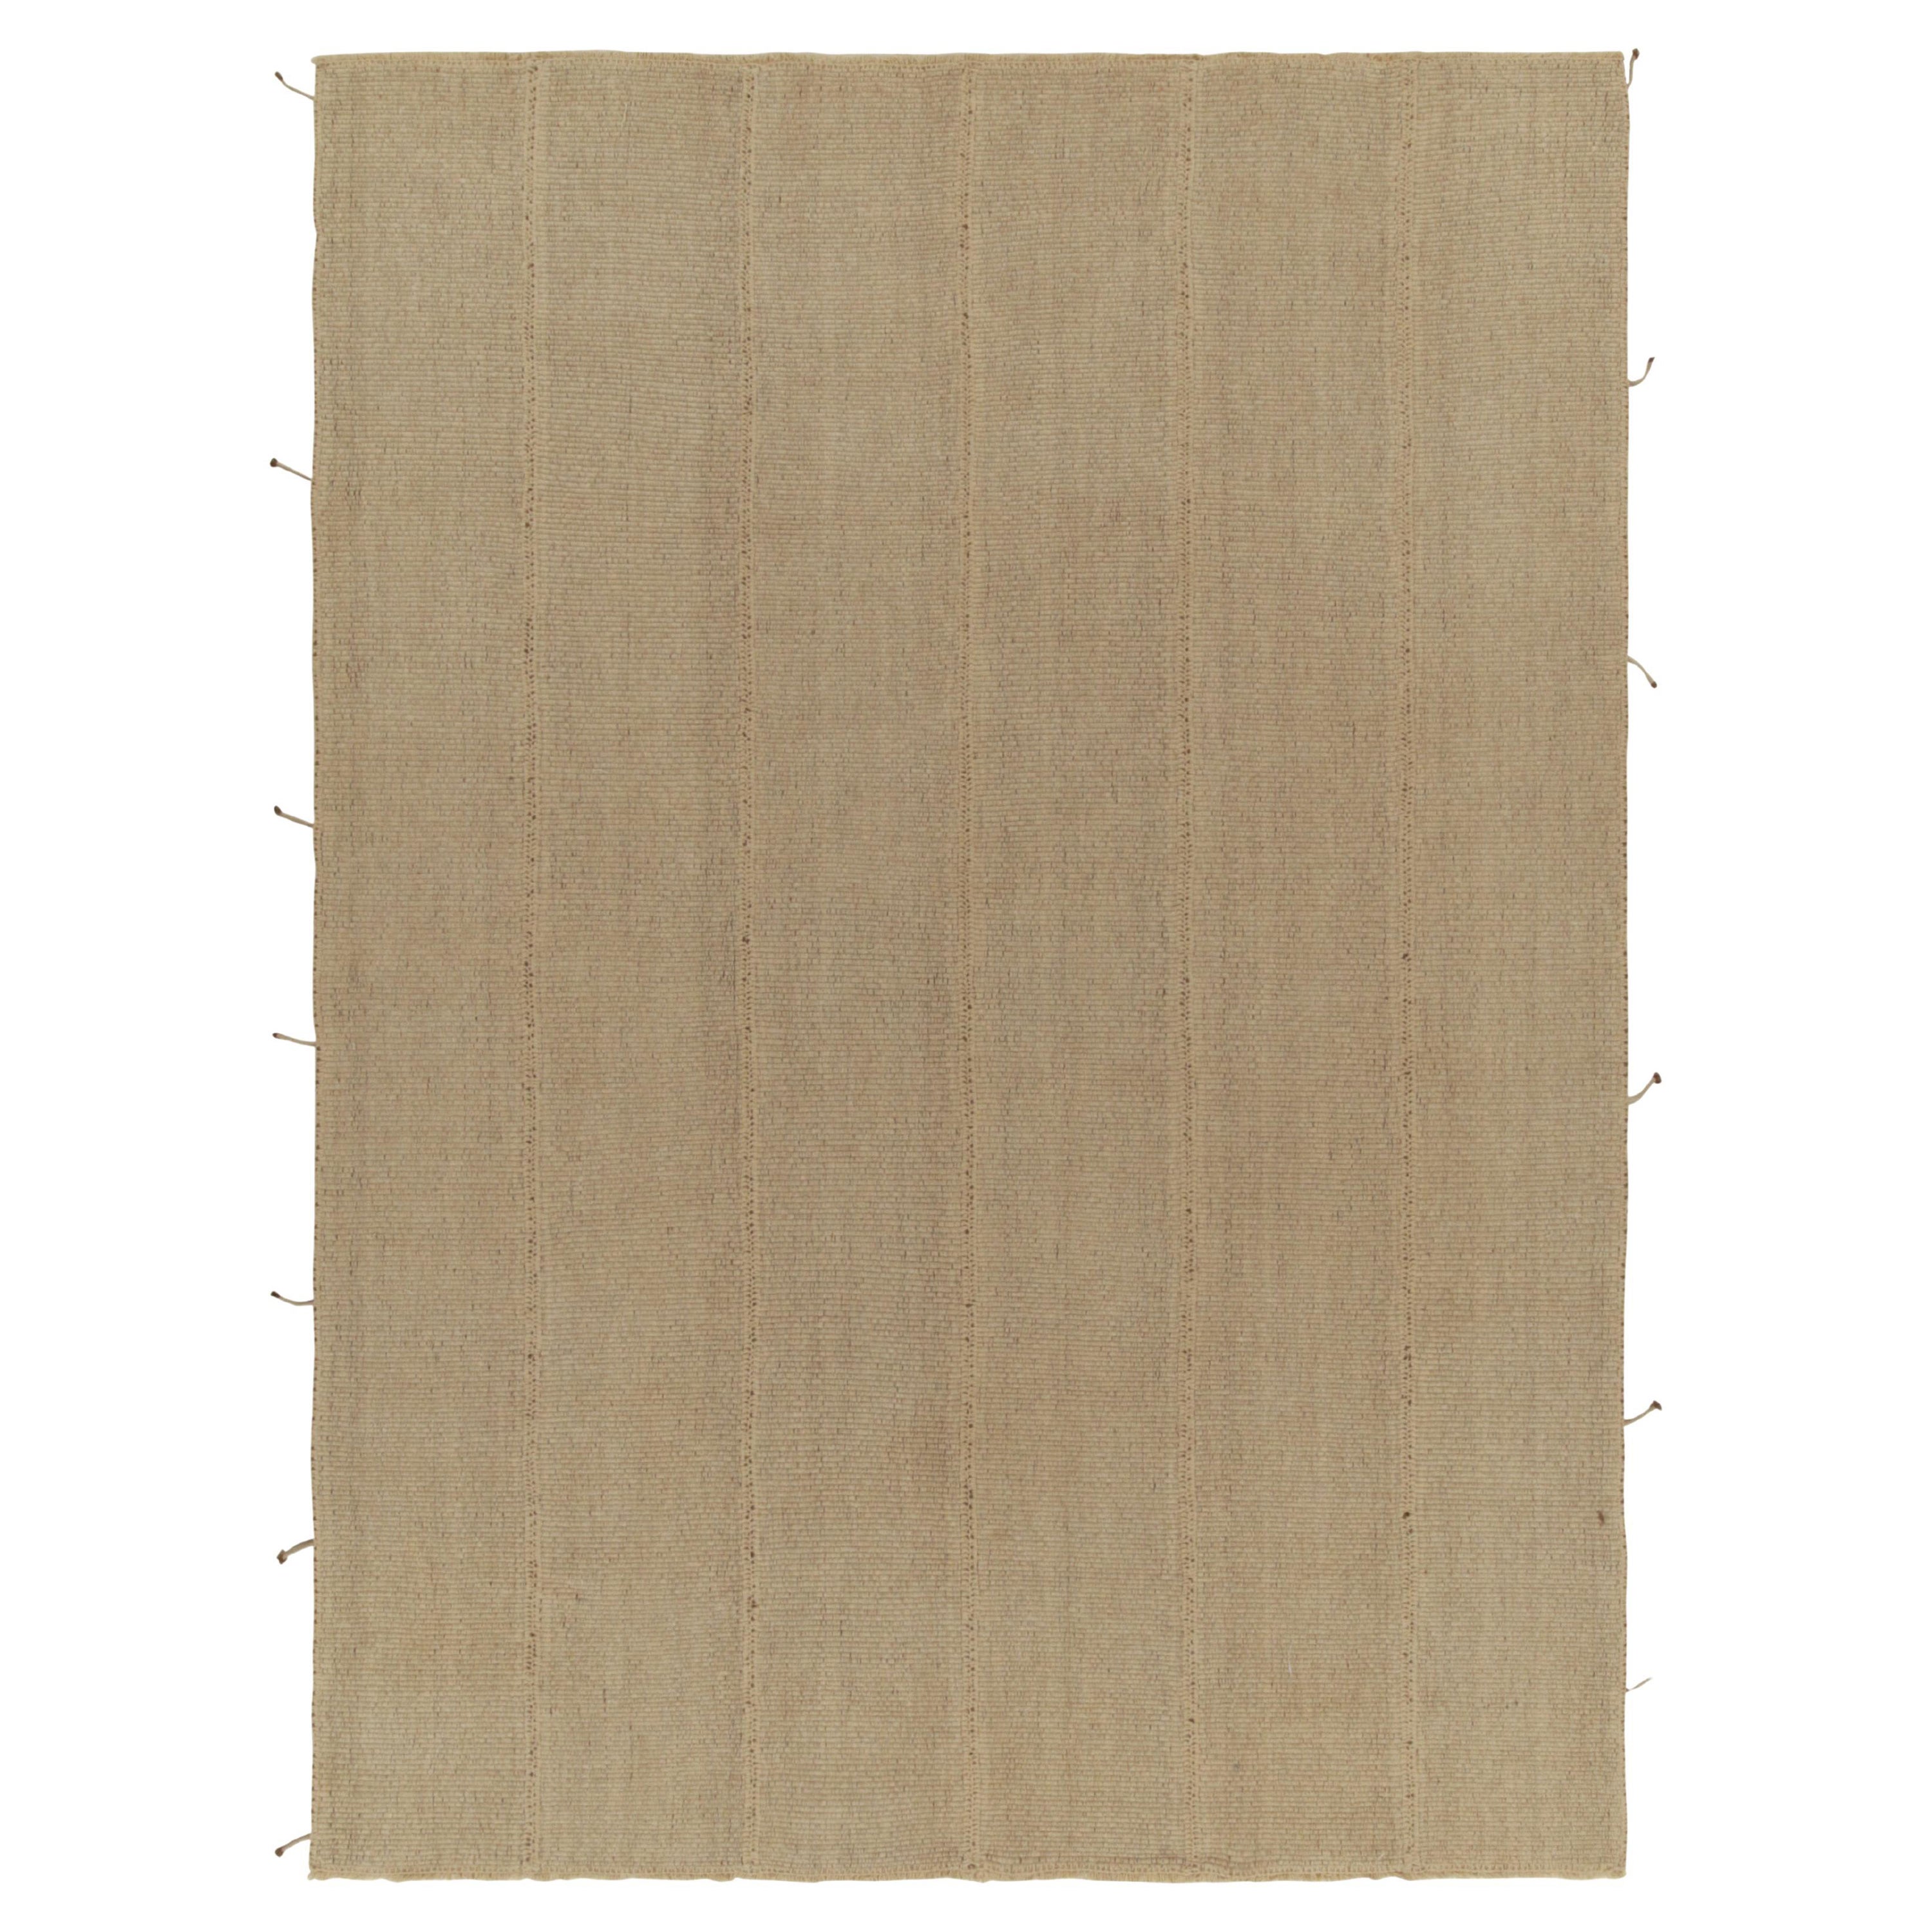 Rug & Kilim’s Contemporary Kilim in Solid, Sandy Beige-Brown Panel Woven Style